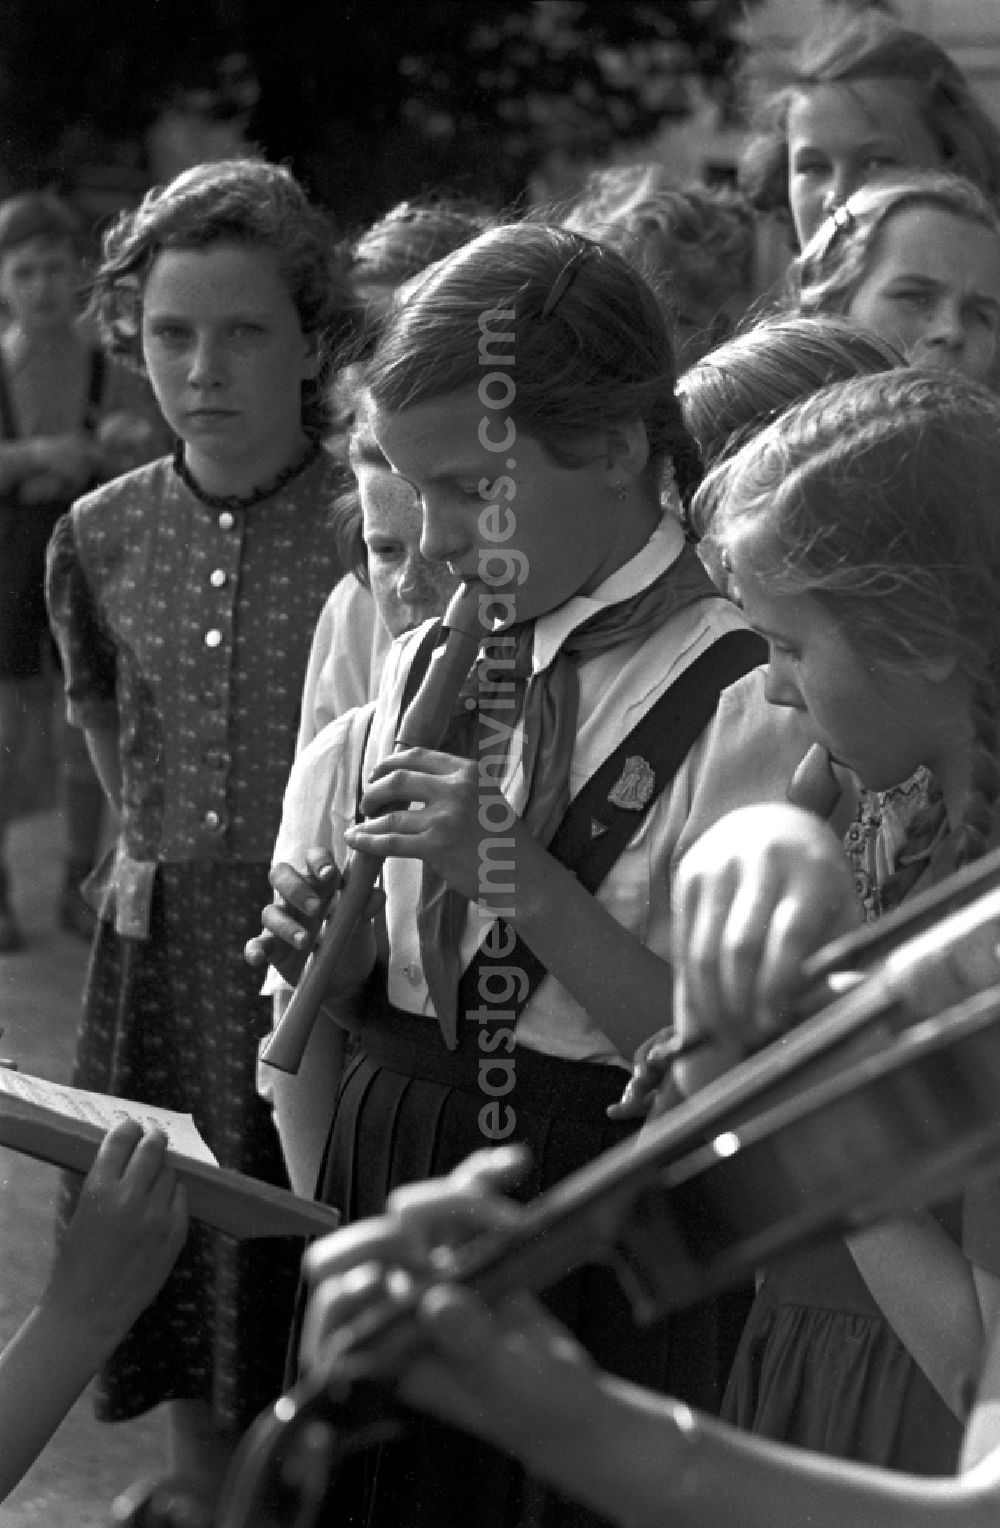 Dresden: Fun and games for children and young people with pioneer clothing singing songs and making music in front of the Pioneer Palace of Albrechtsberg Castle in the district of Loschwitz in Dresden in the state of Saxony on the territory of the former GDR, German Democratic Republic